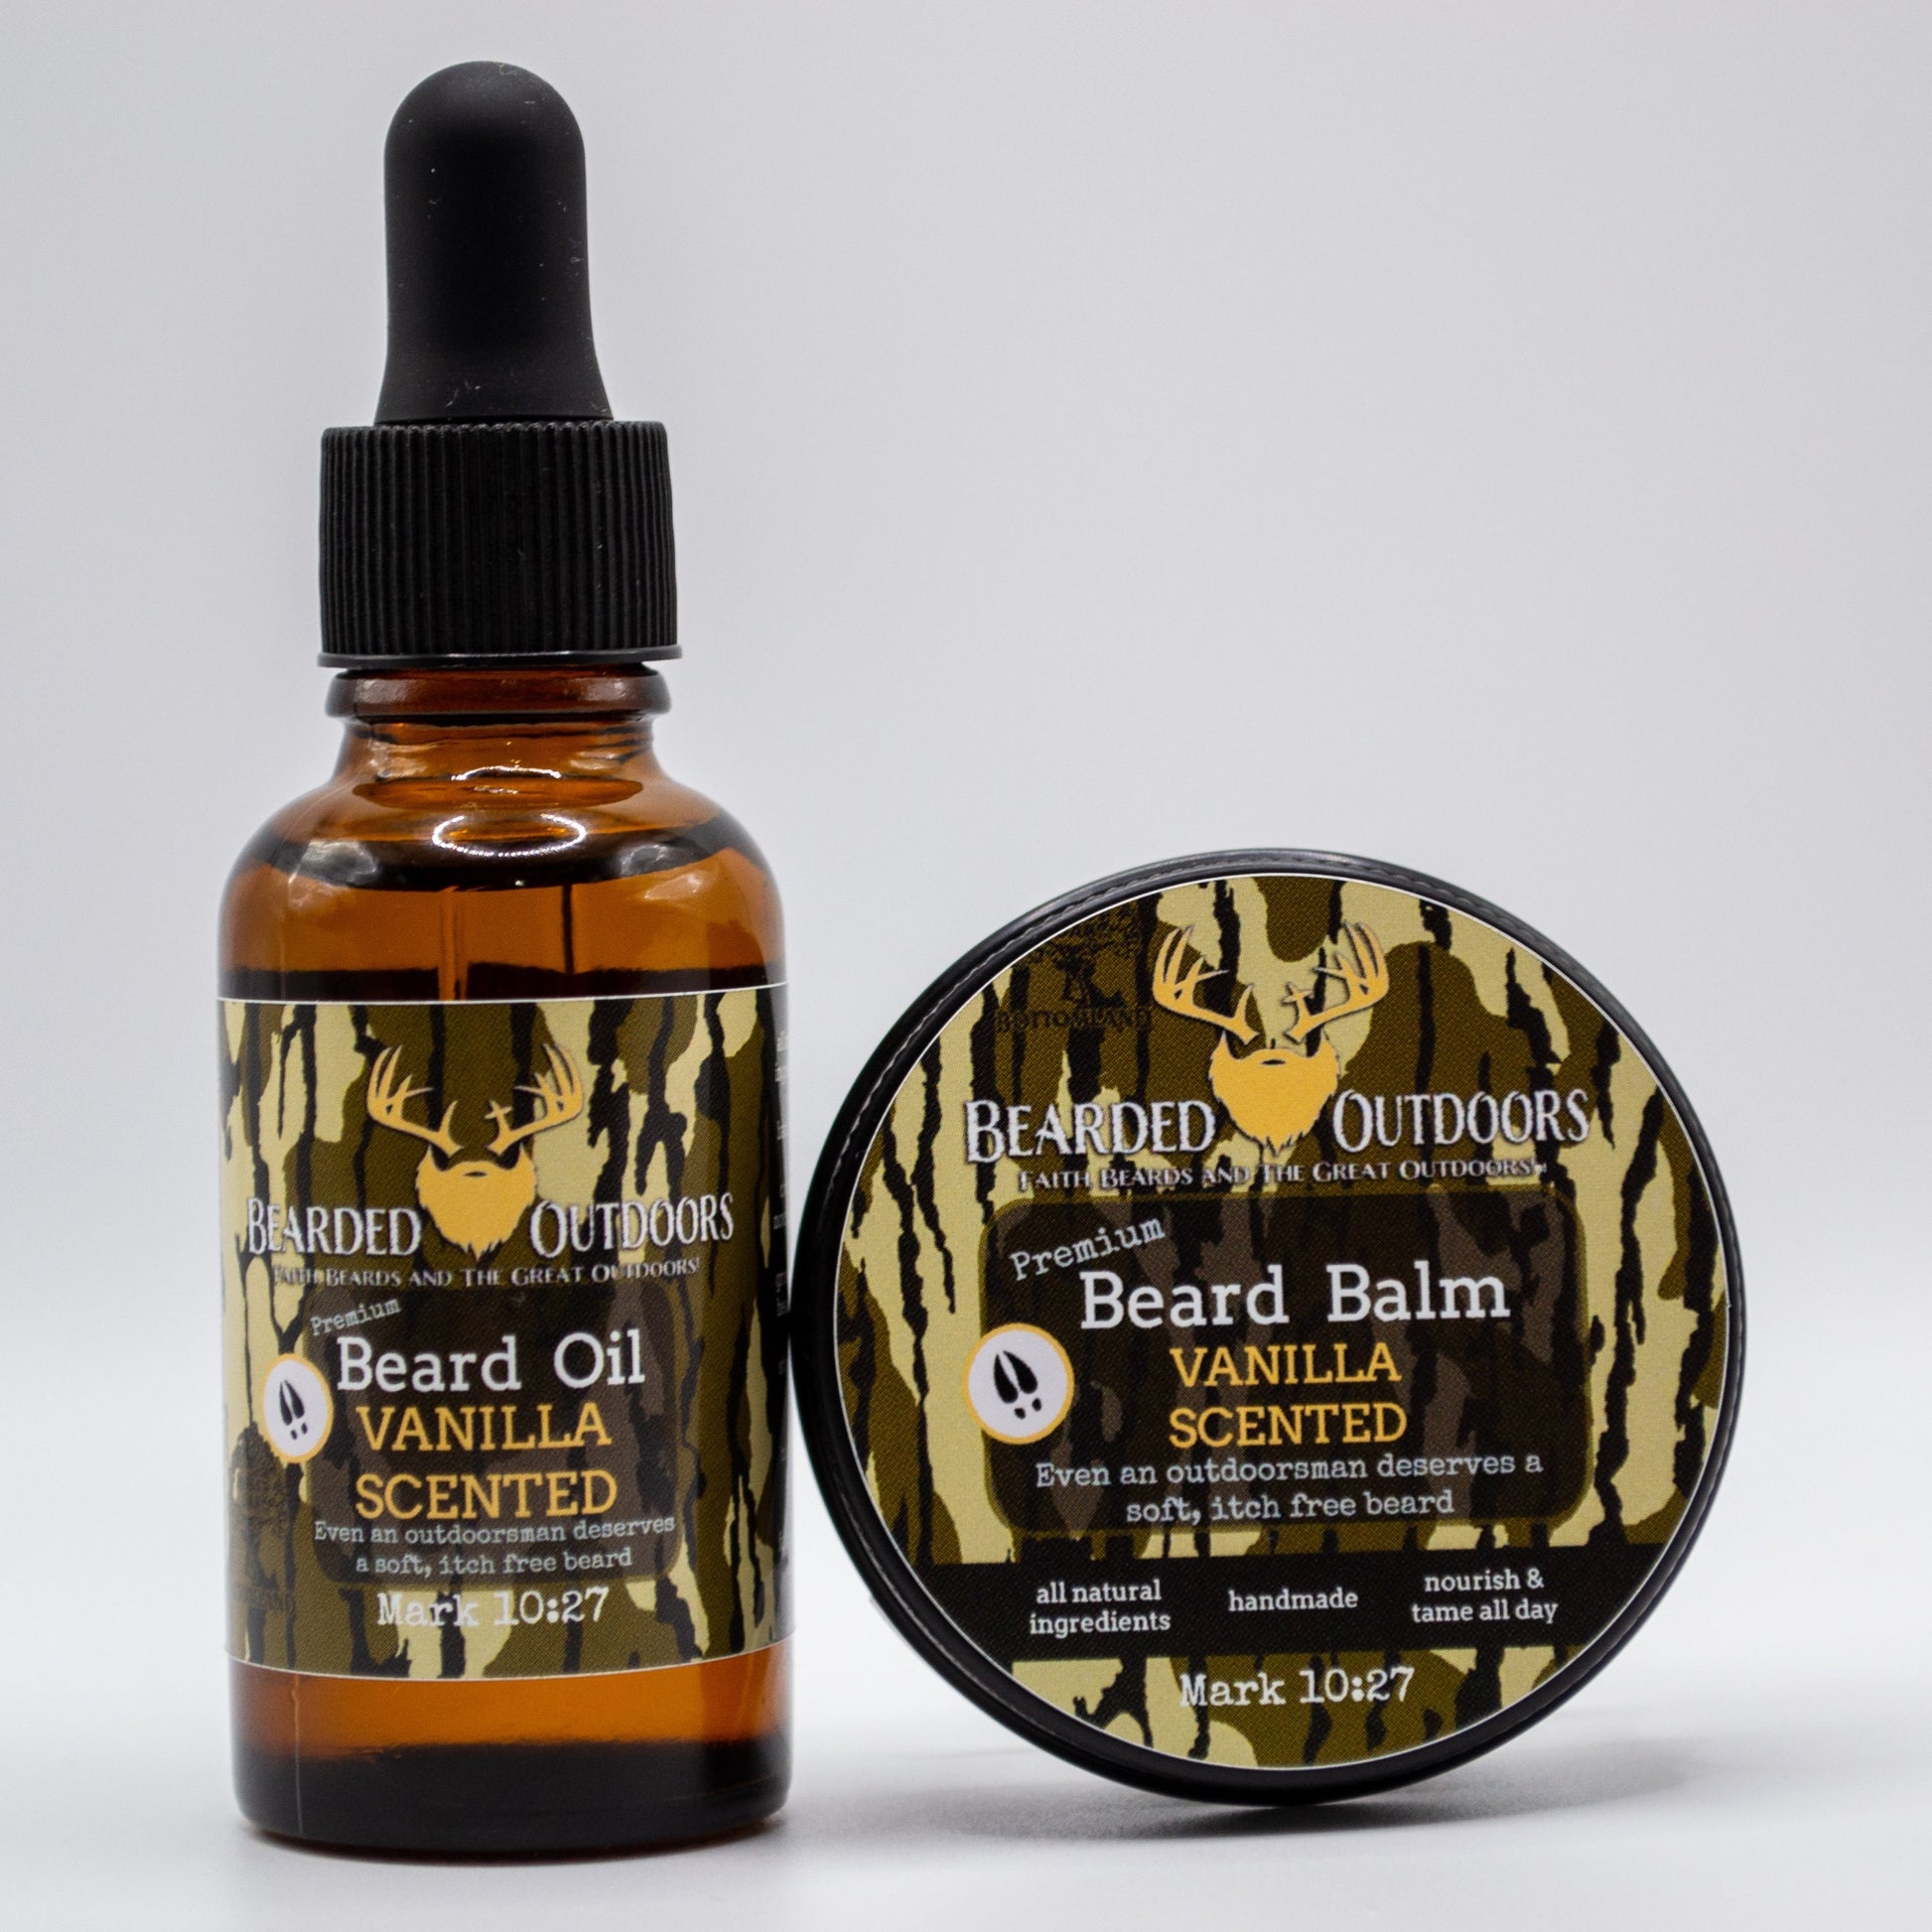 Mossy Oak Vanilla Scented Premium Beard Oil and Beard Balm wrapped in Bottomland Camo by Bearded Outdoors